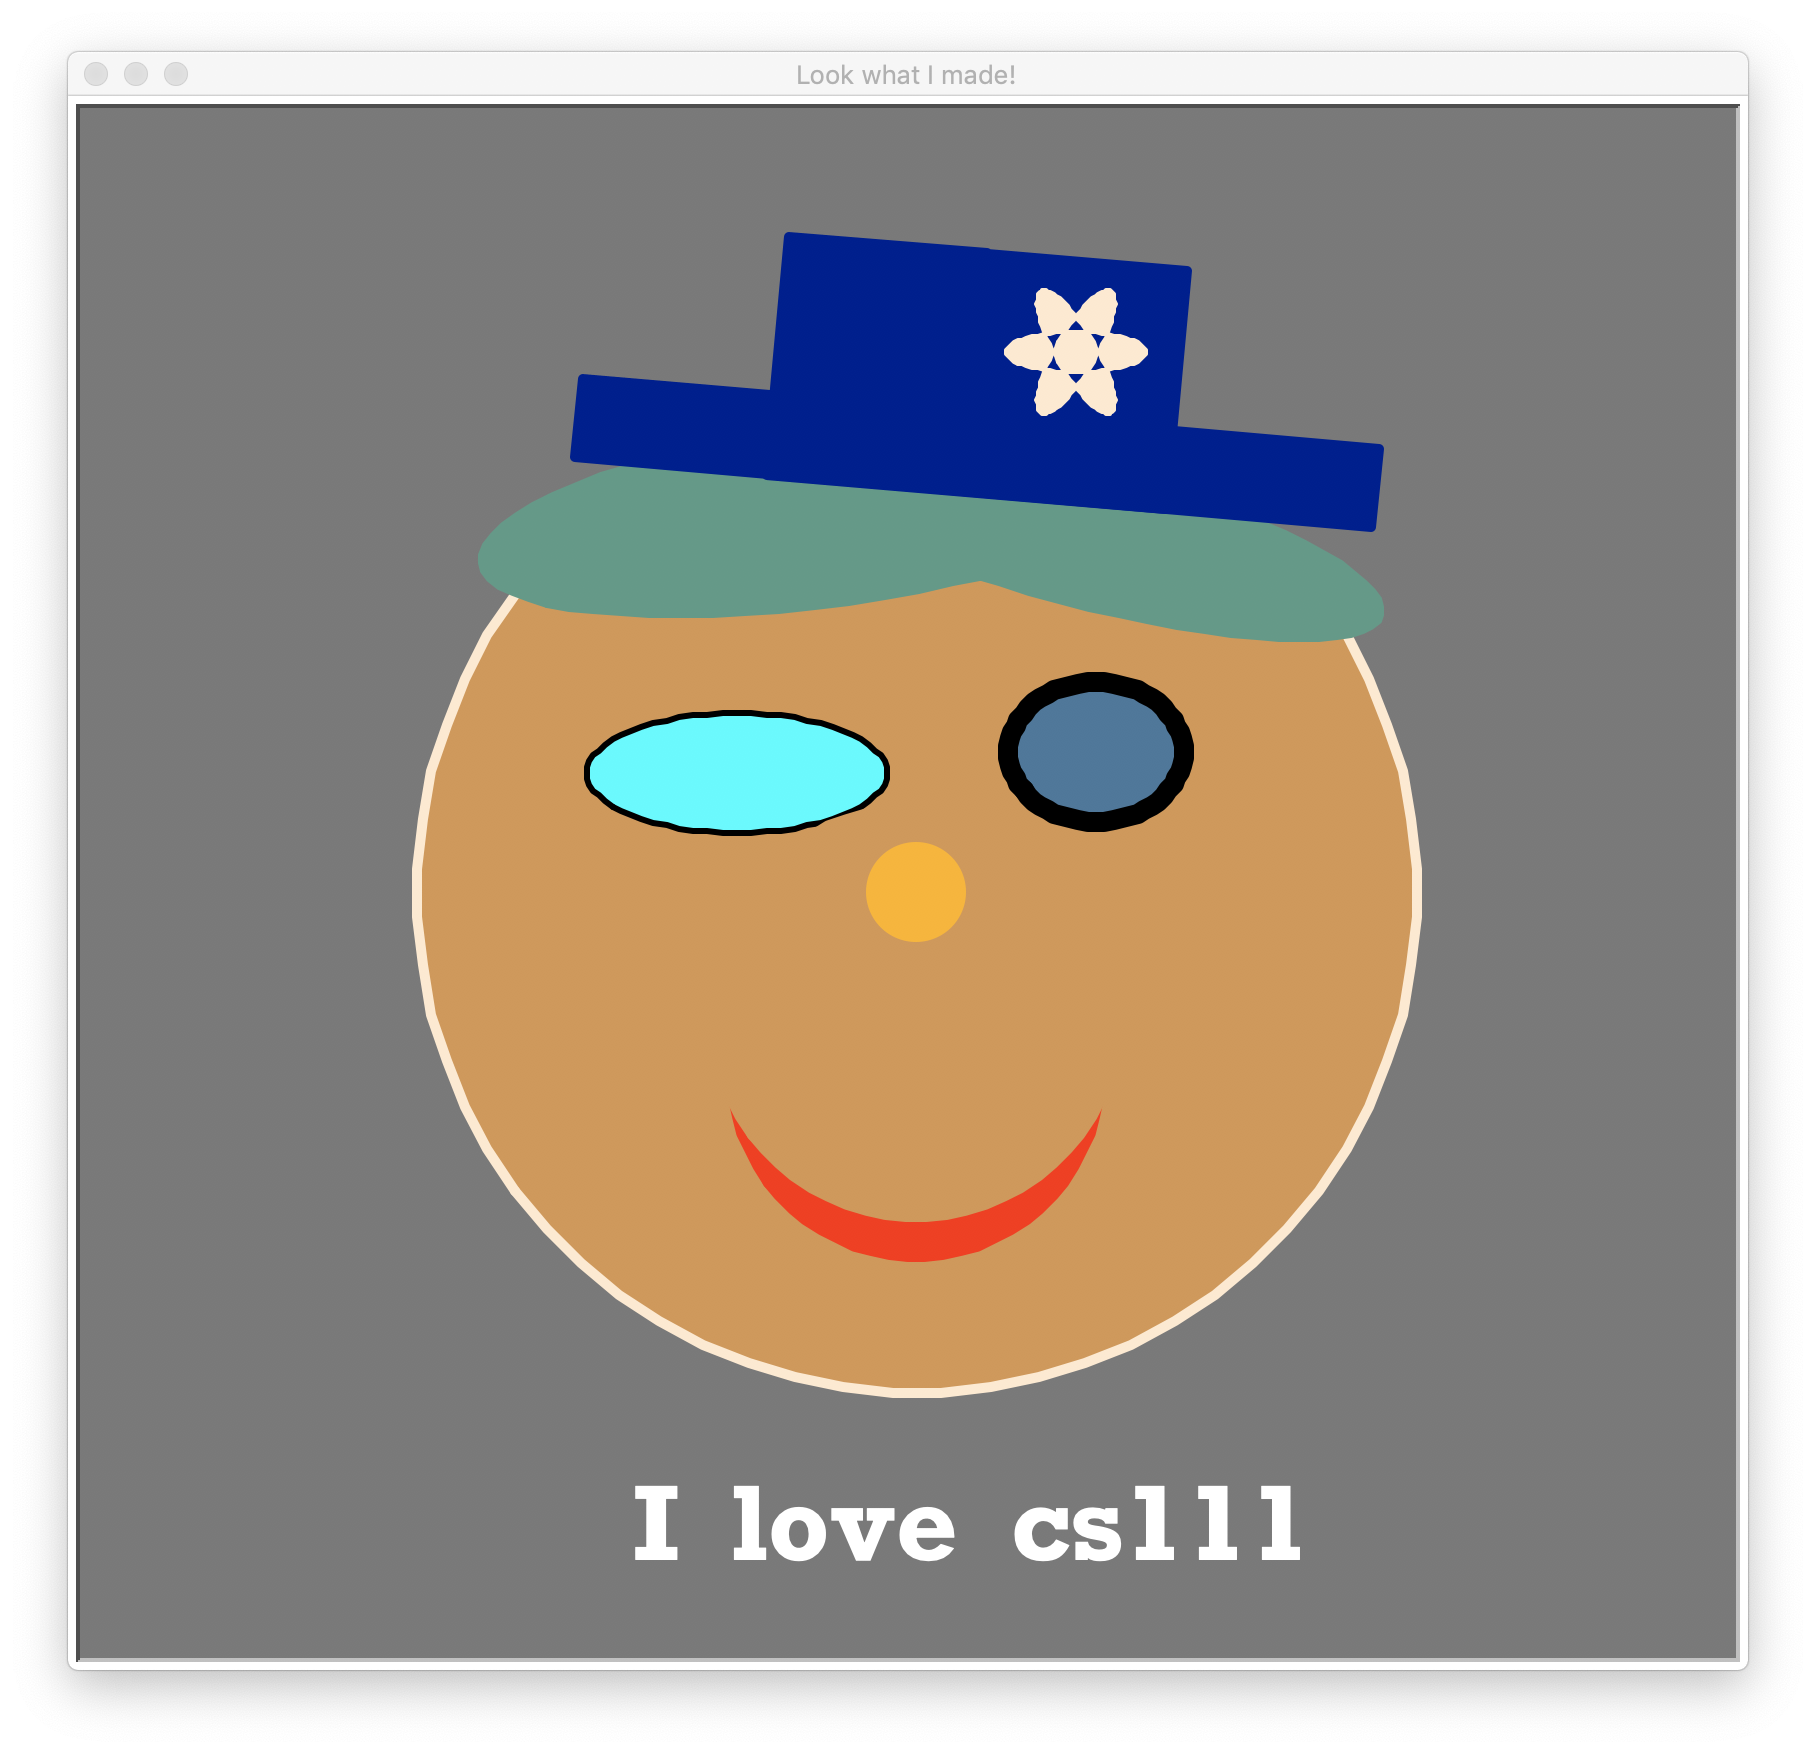 An image of a face composed of simple shapes like circles and ellipses. It is wearing a rectangular hat, and the words 'I love cs111' are printed below it. This image was drawn using turtle graphics.